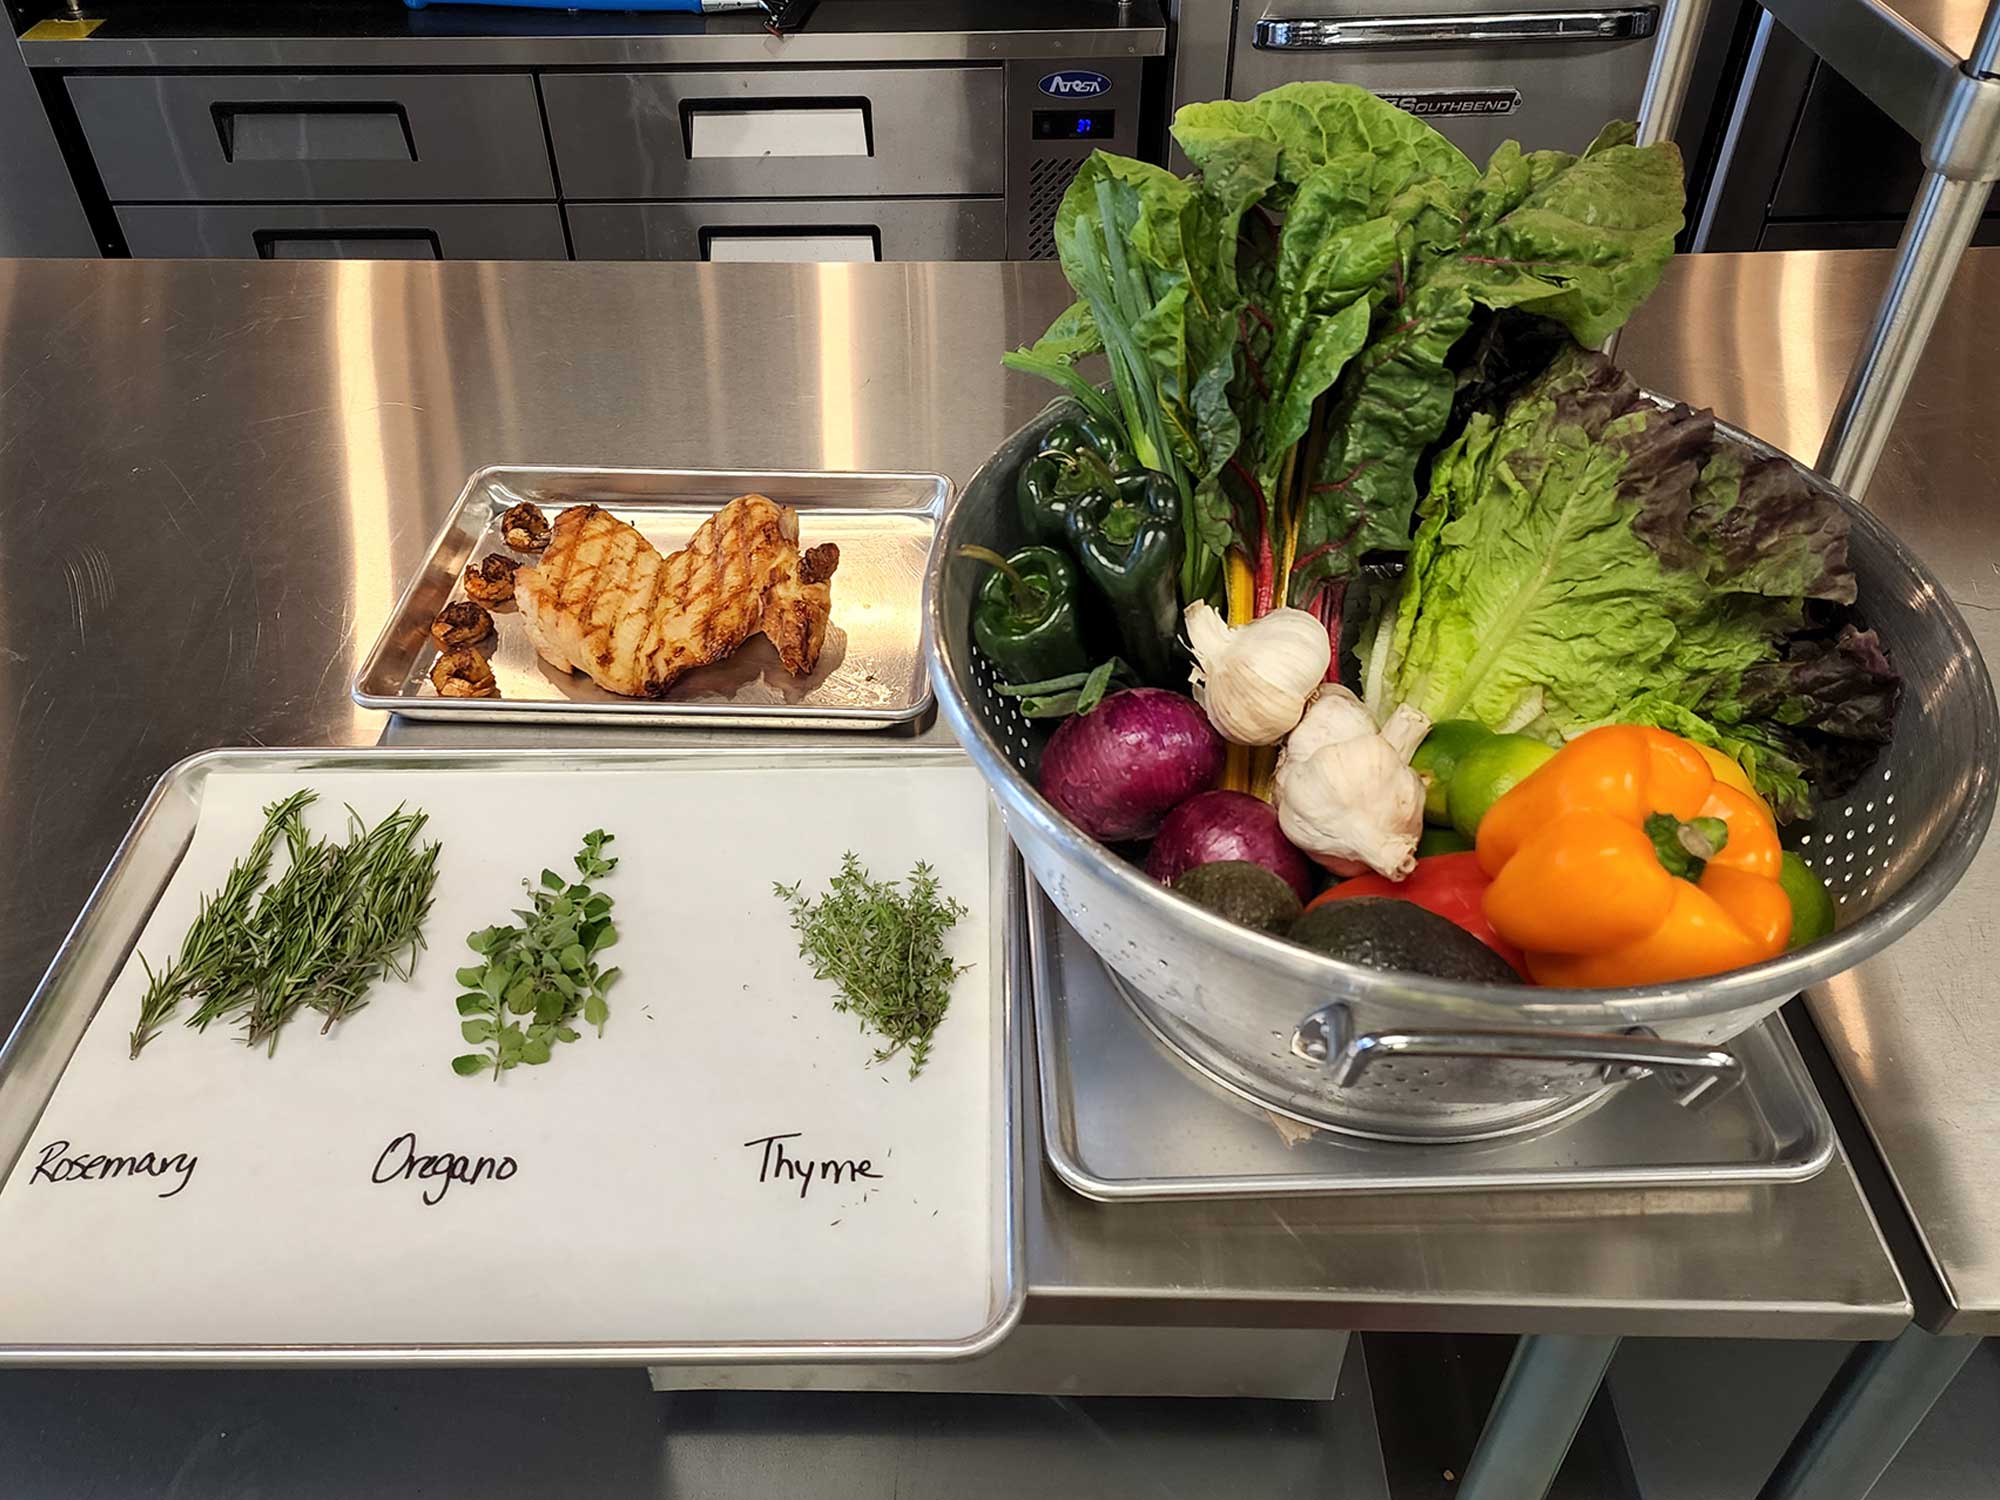 various foods are displayed on a metal industrial kitchen countertop. three bunches of herbs are labeled rosemary, oregano and thyme.